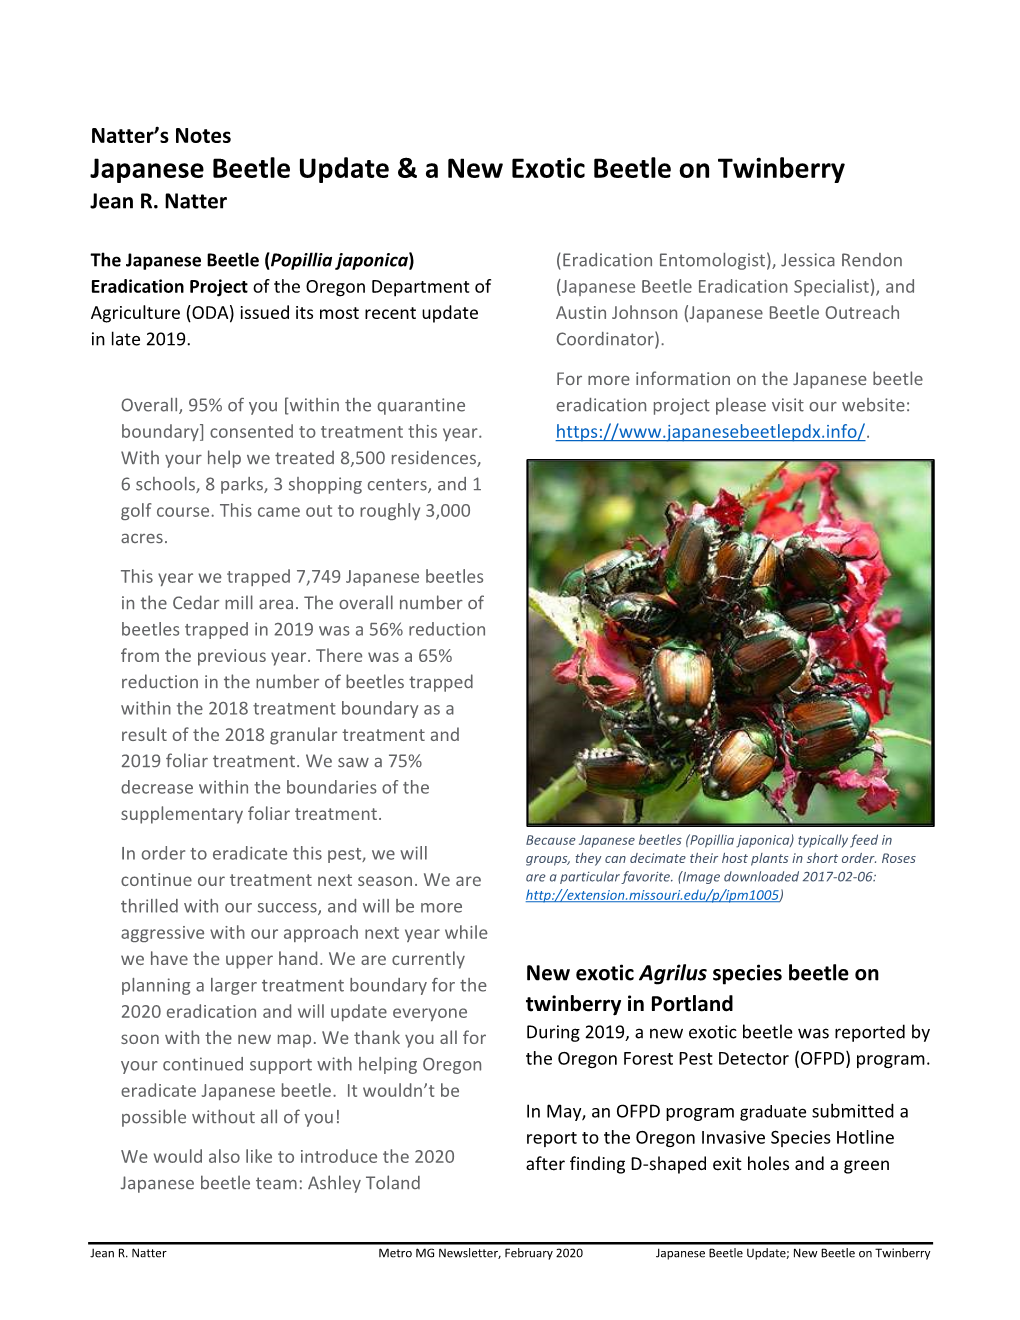 Japanese Beetle Update & a New Exotic Beetle on Twinberry